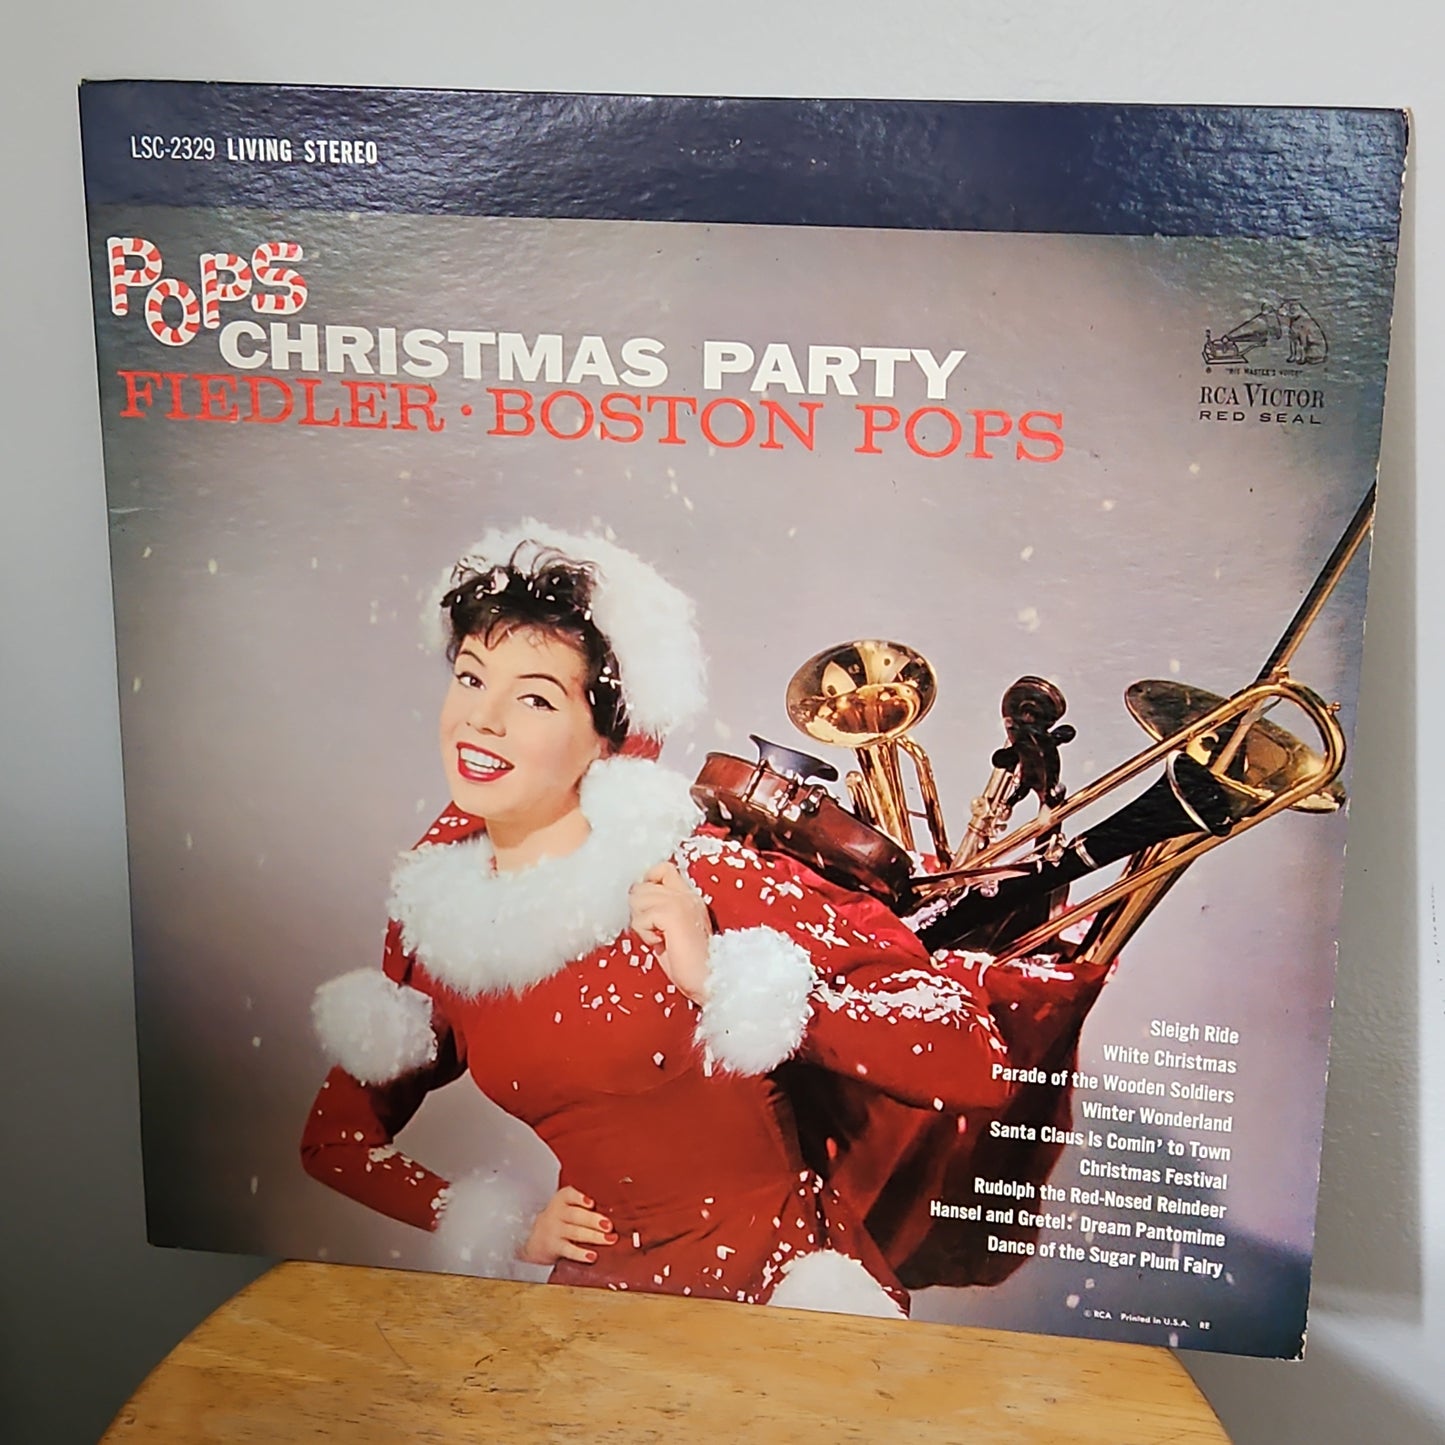 Fiedler Boston Pops Pops Christmas Party By RCA Victor Records